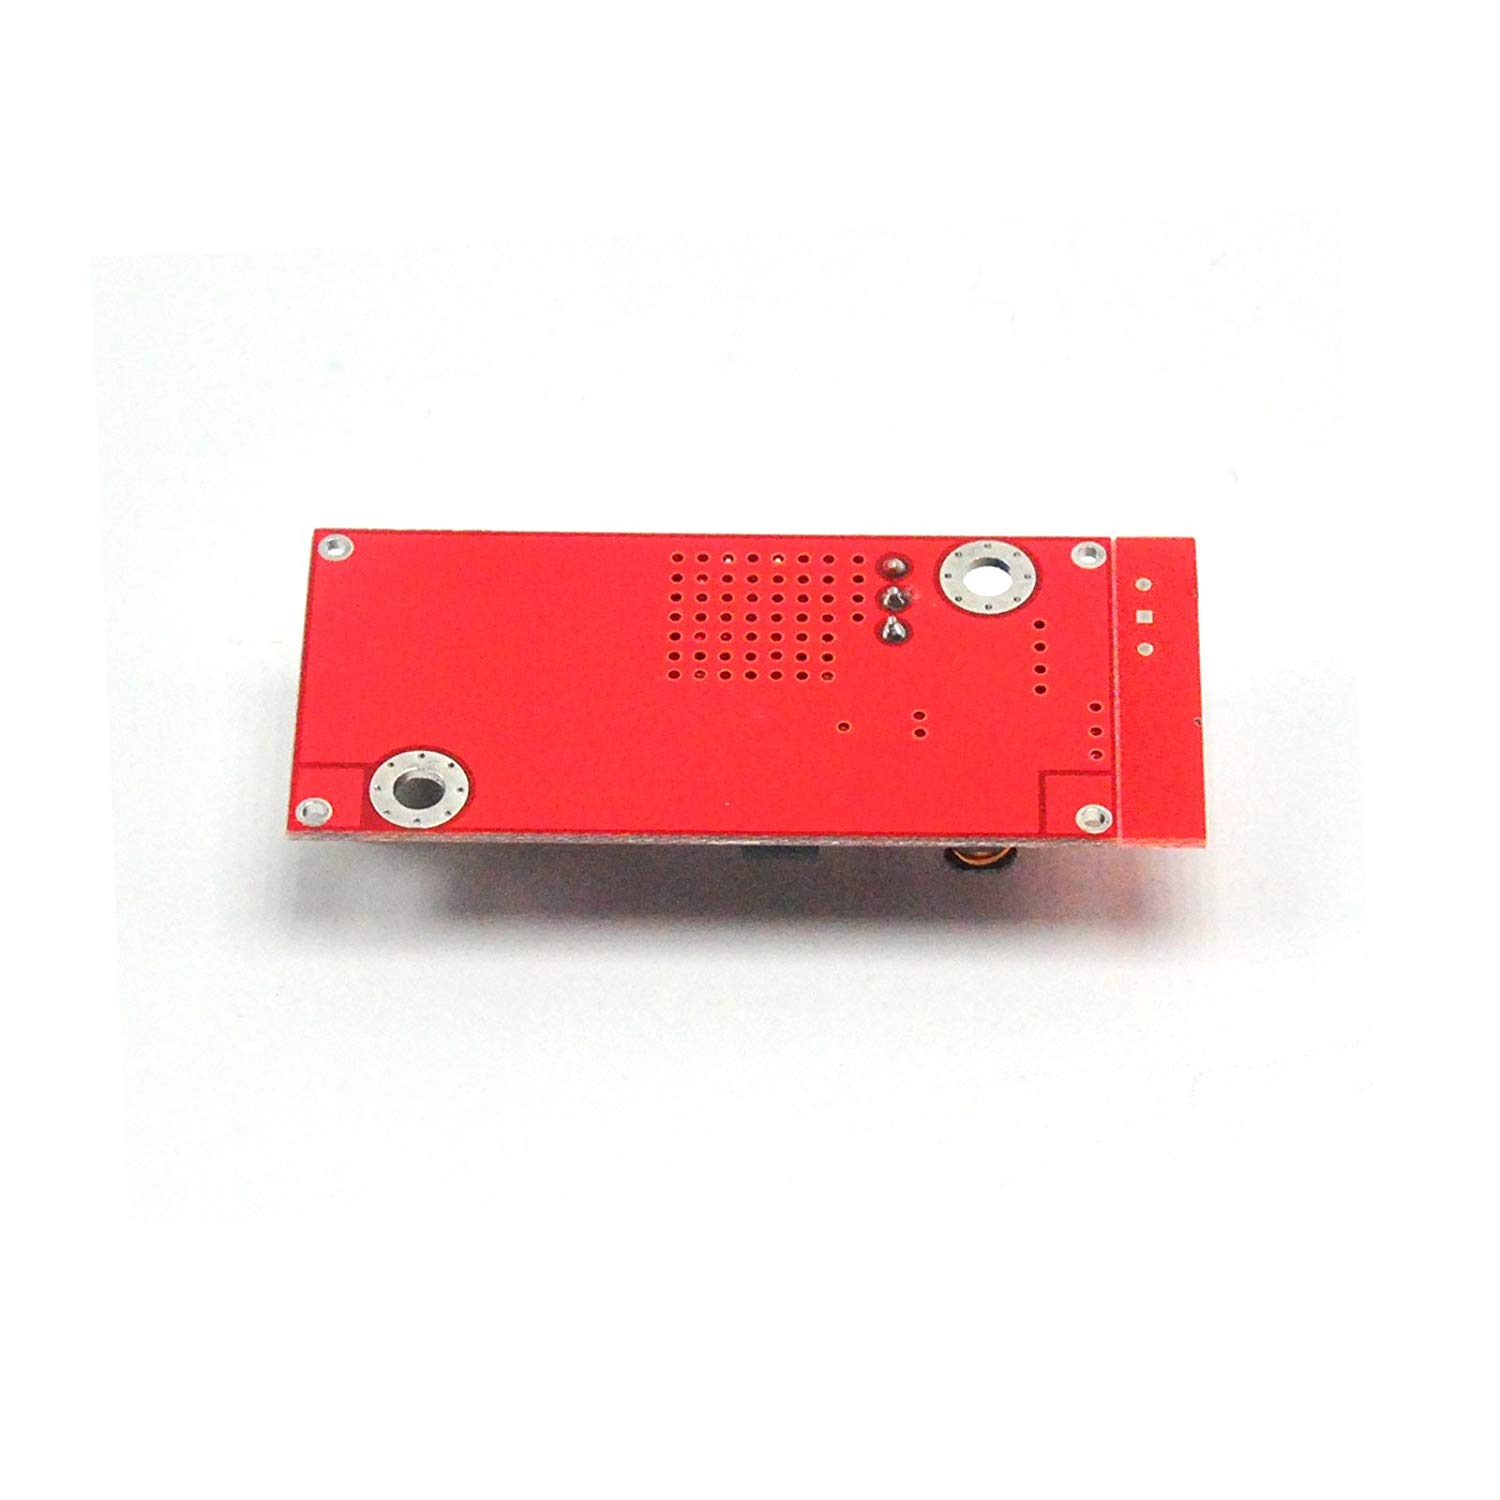 DC-DC LM2587 4-34V to 4-60V Step Up Module 5A Switching Current QS-0348CBDM-15W